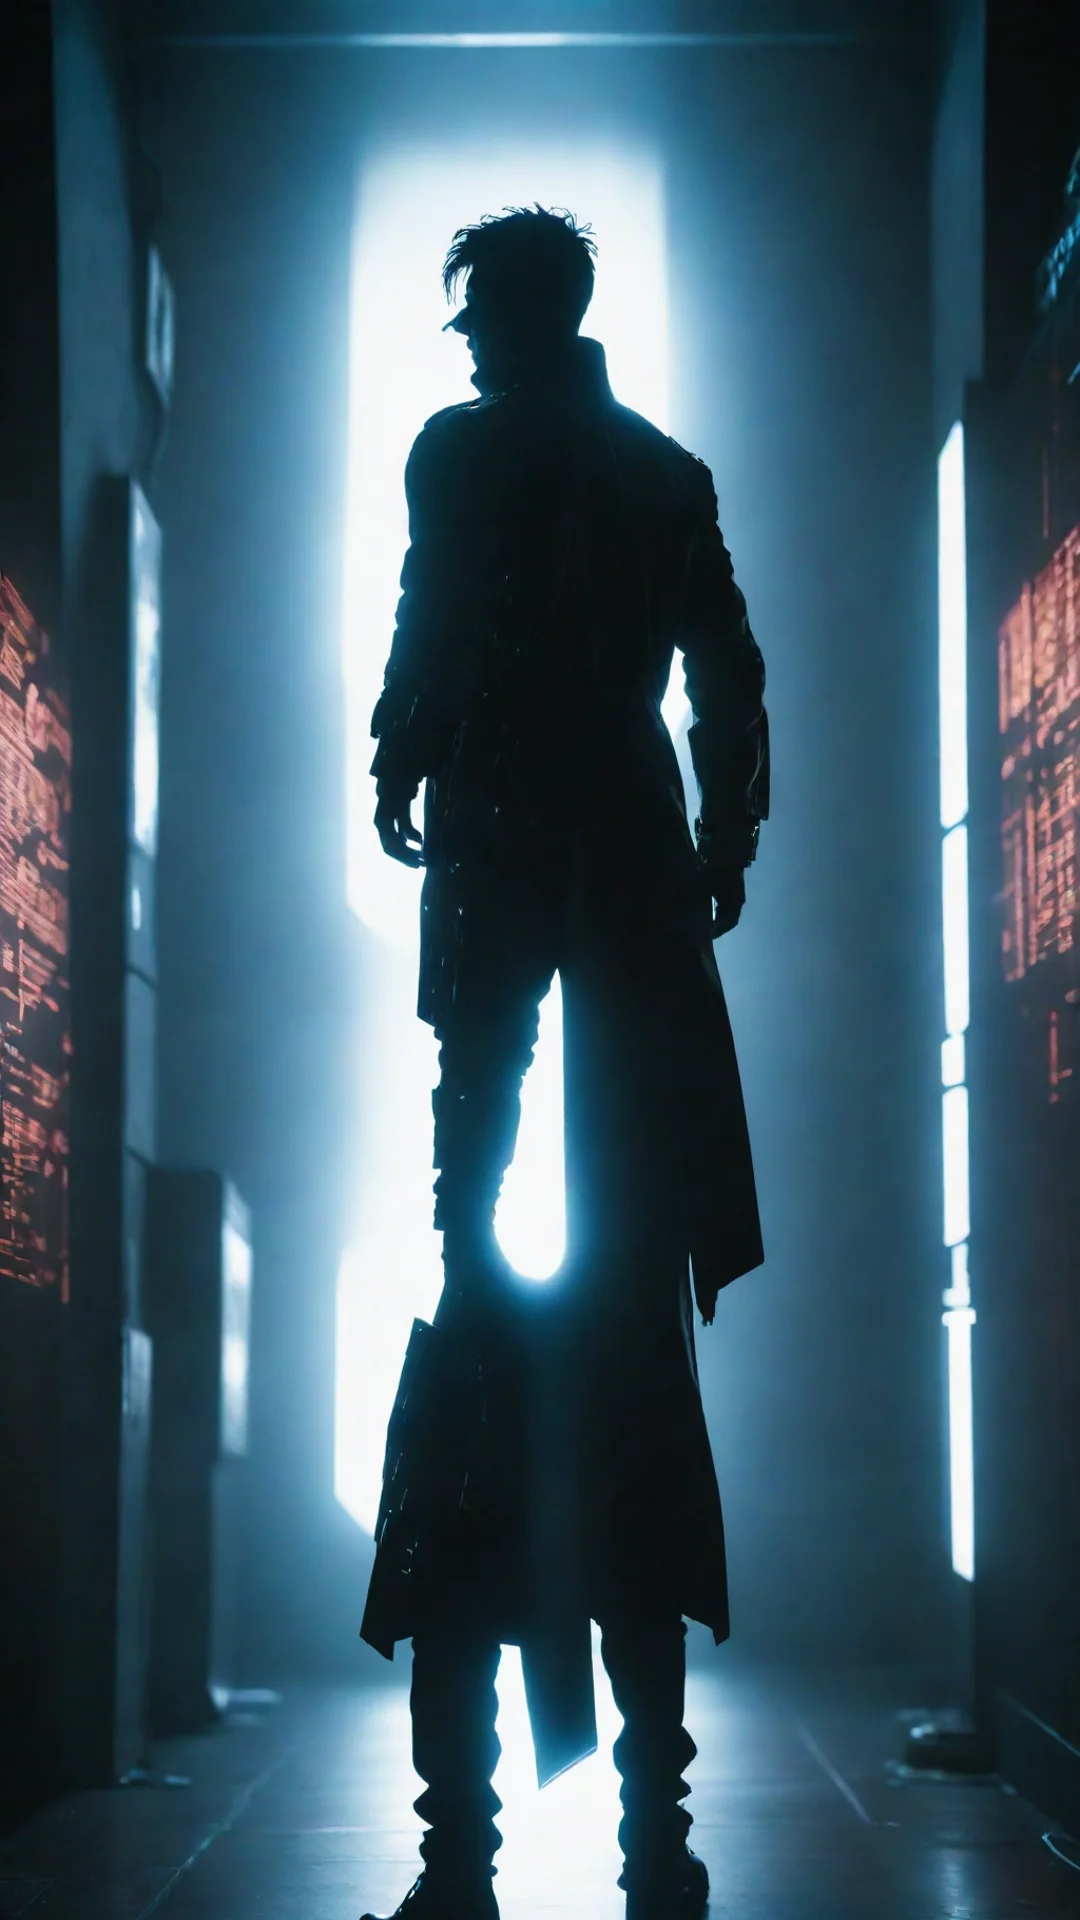 aitrending futuristic backlit silhouette of person cyberpunk character dramatic lighting cinematic lighting hyper maximilism highly good looking fantastic 1%3Ftall tall